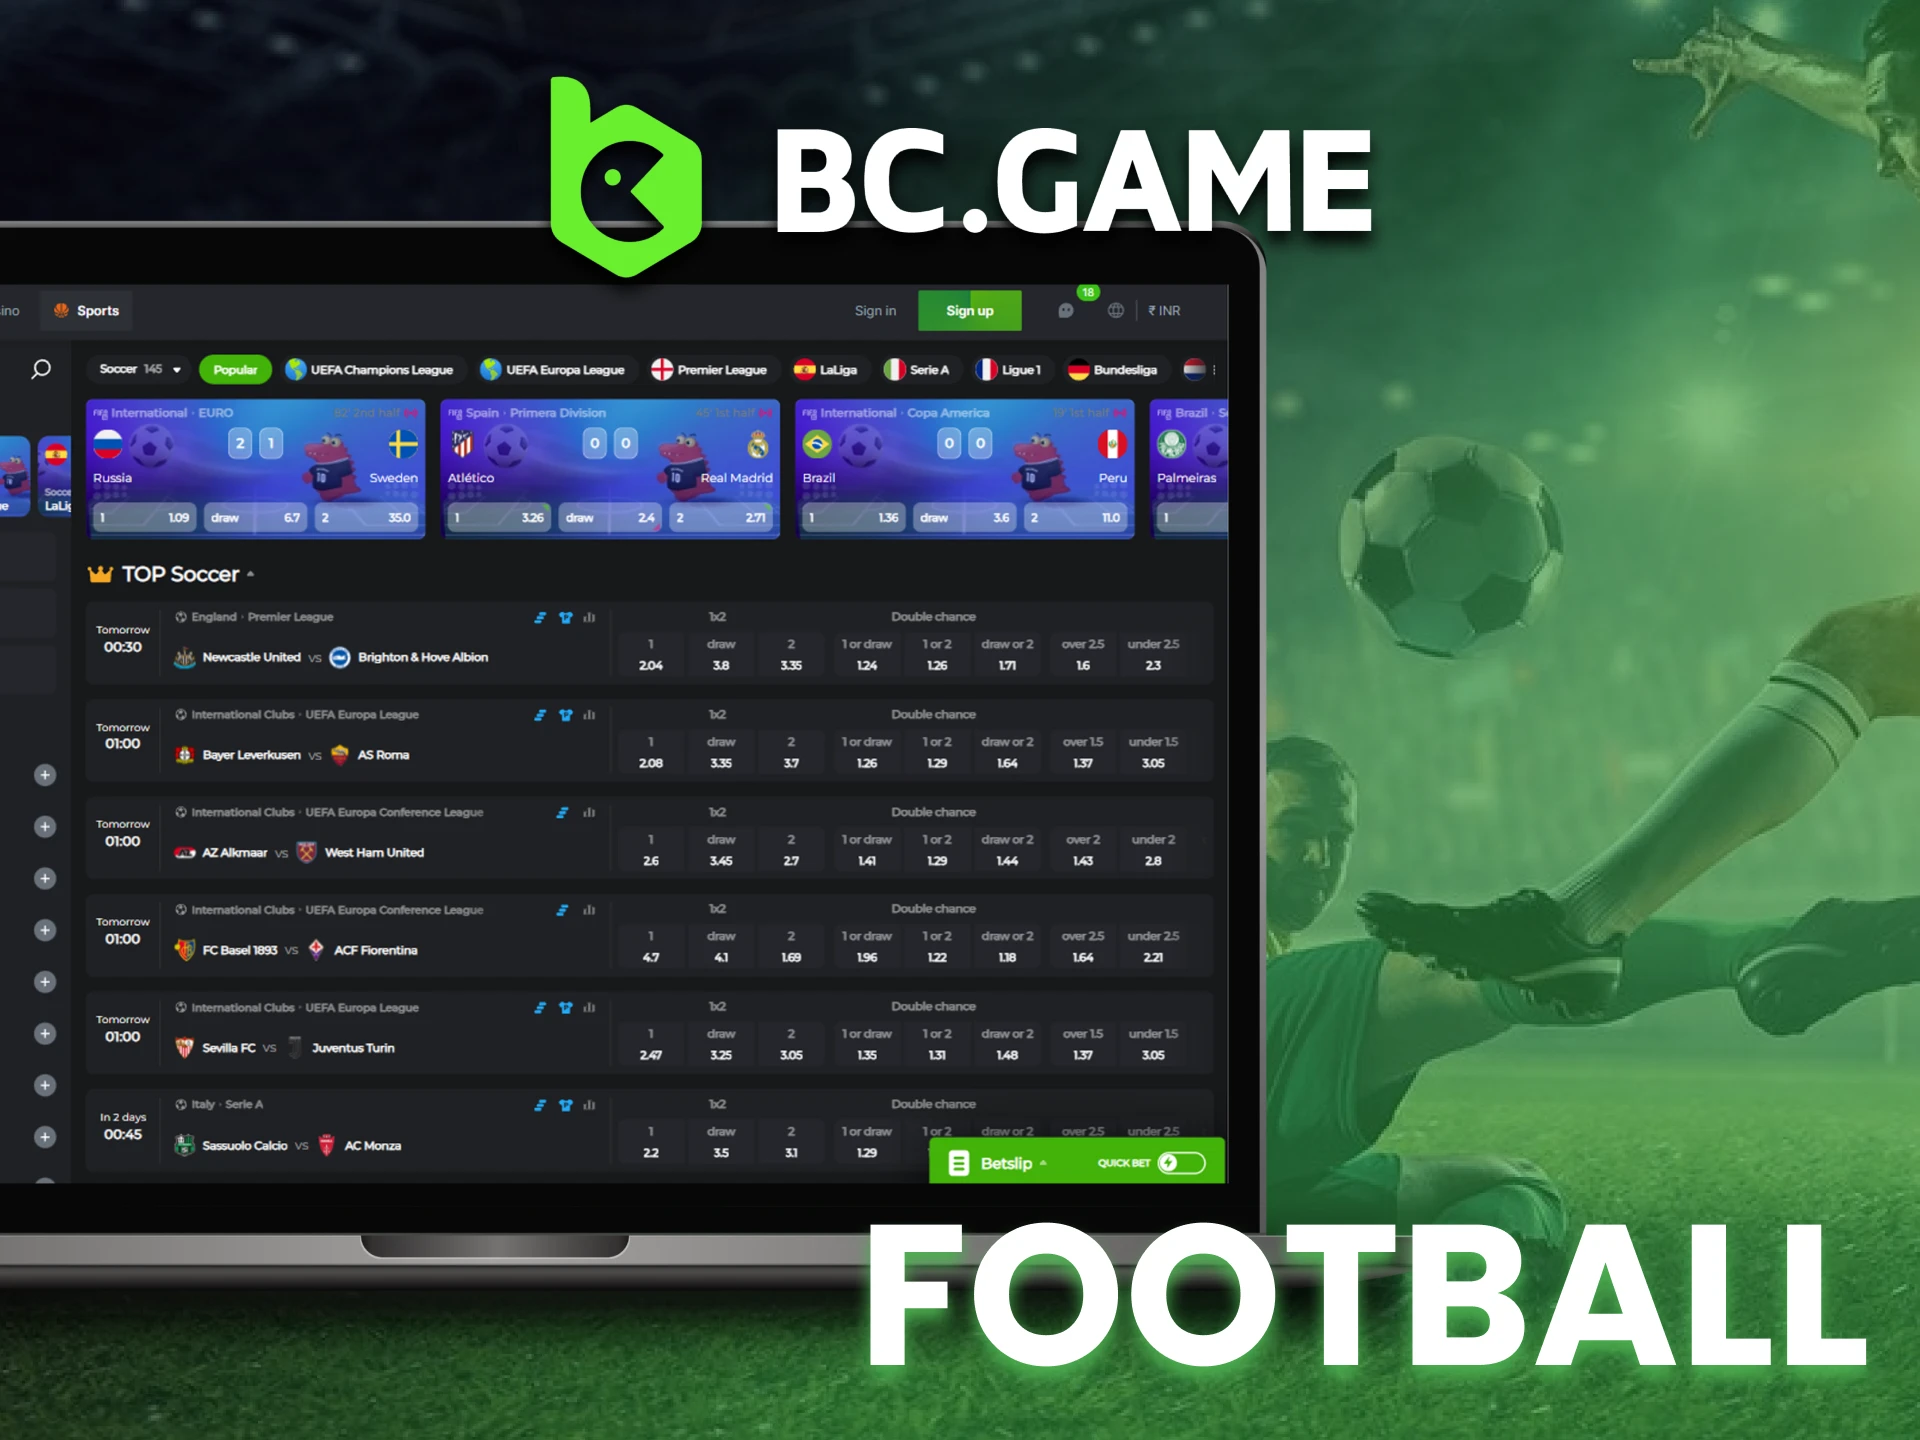 Bet on recent football matches at BC Game.